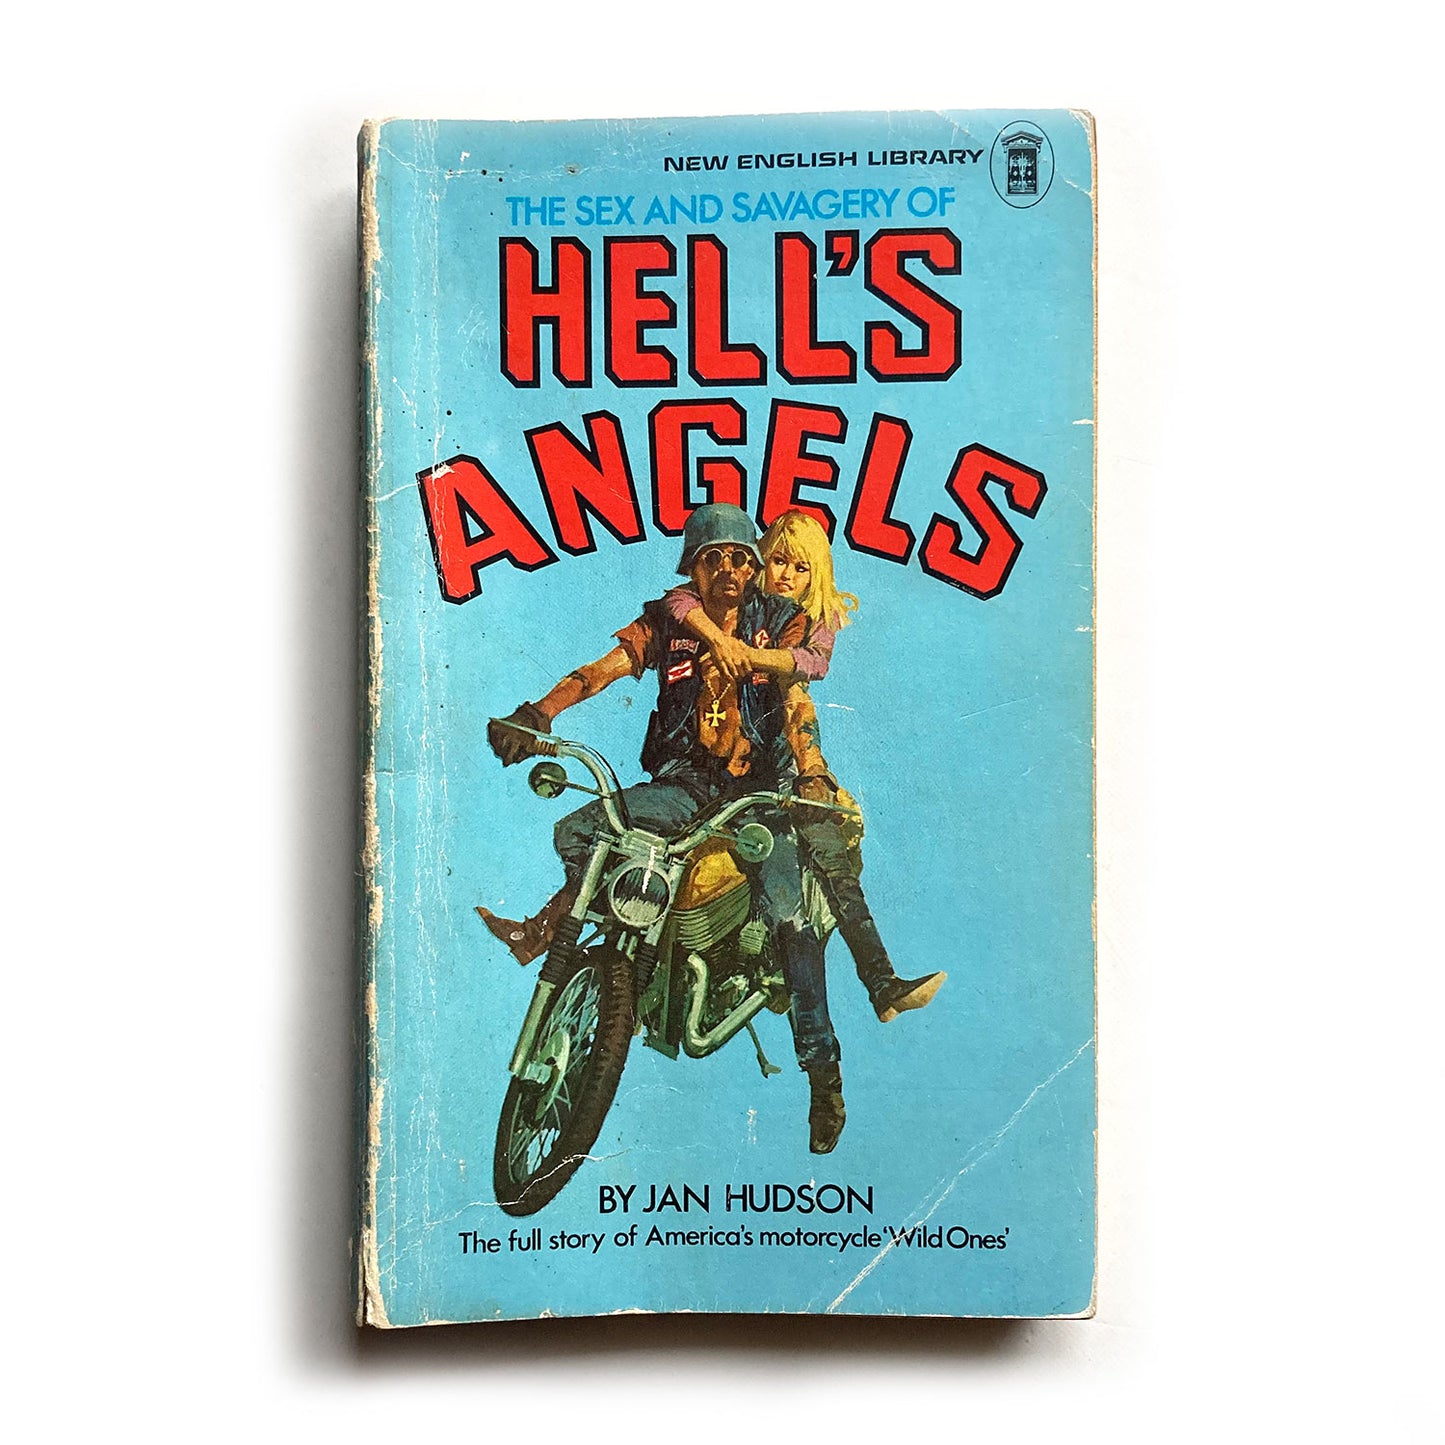 The Sex and Savagery of Hell's Angels by Jan Hudson, NEL paperback, 1973